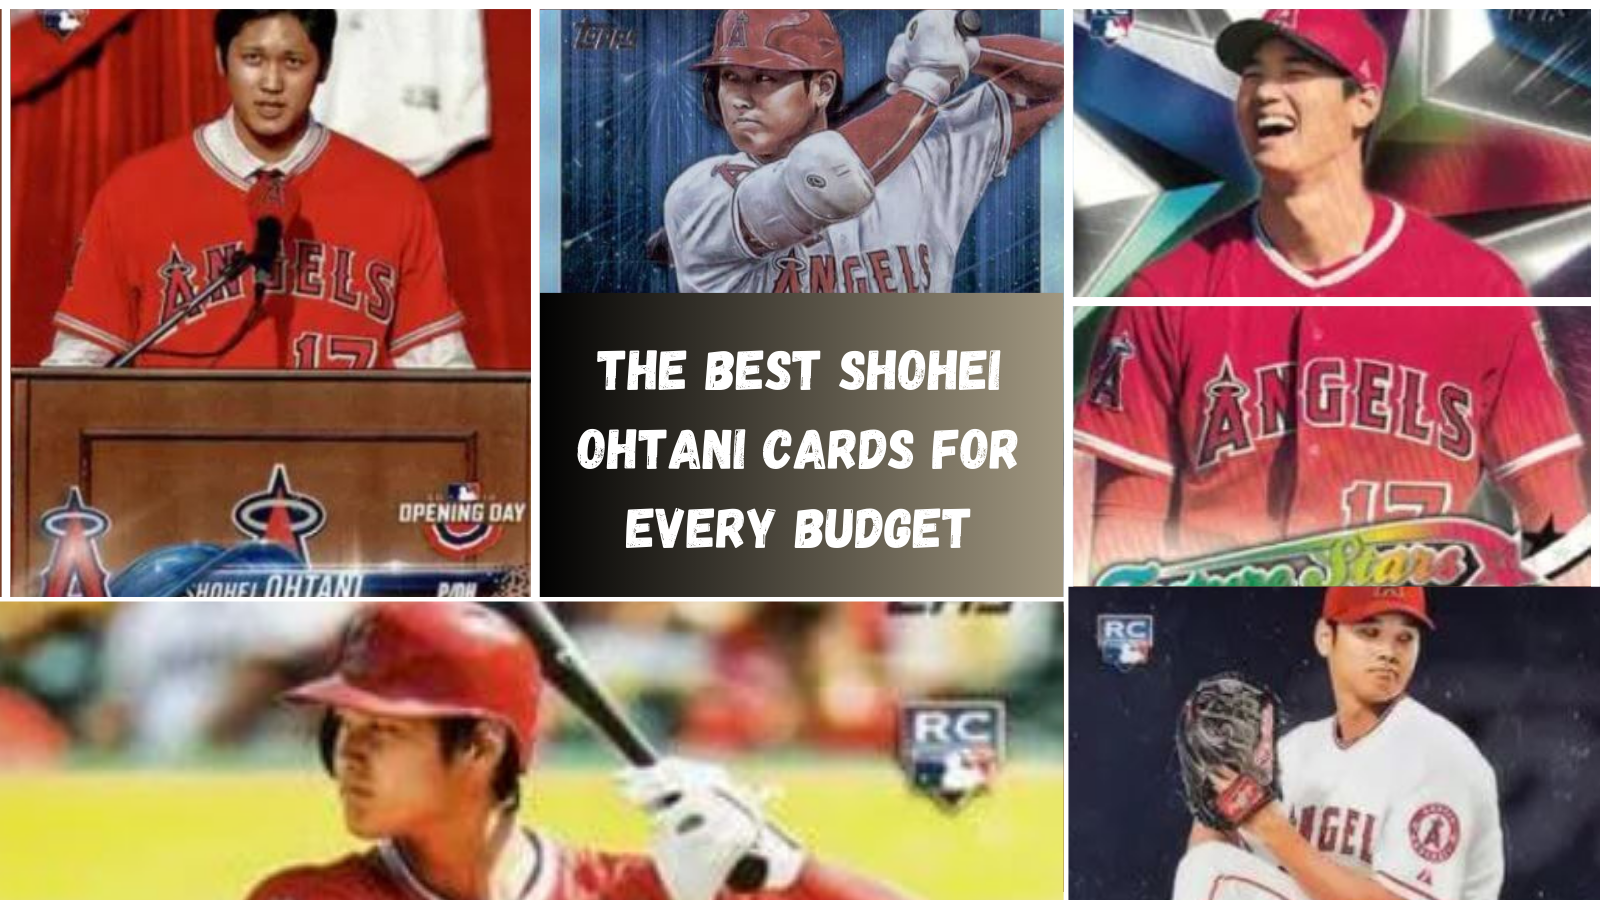 Lot - 2018 Topps Heritage Shohei Ohtani Now & Then RC